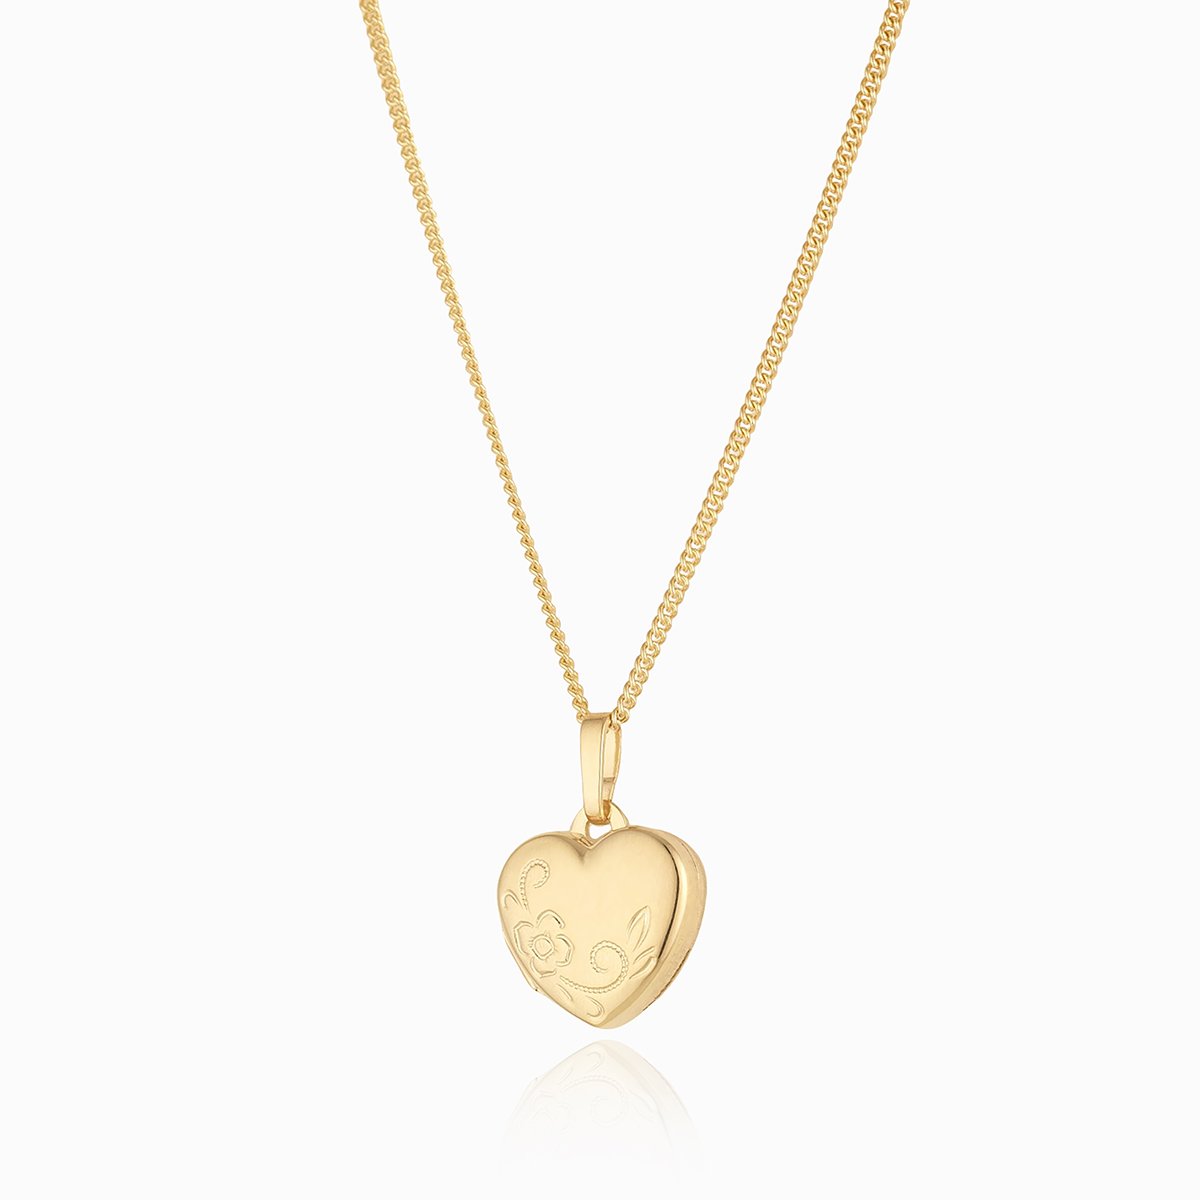 Child's 9 ct gold heart locket embossed with a floral design on a 9 ct gold curb chain